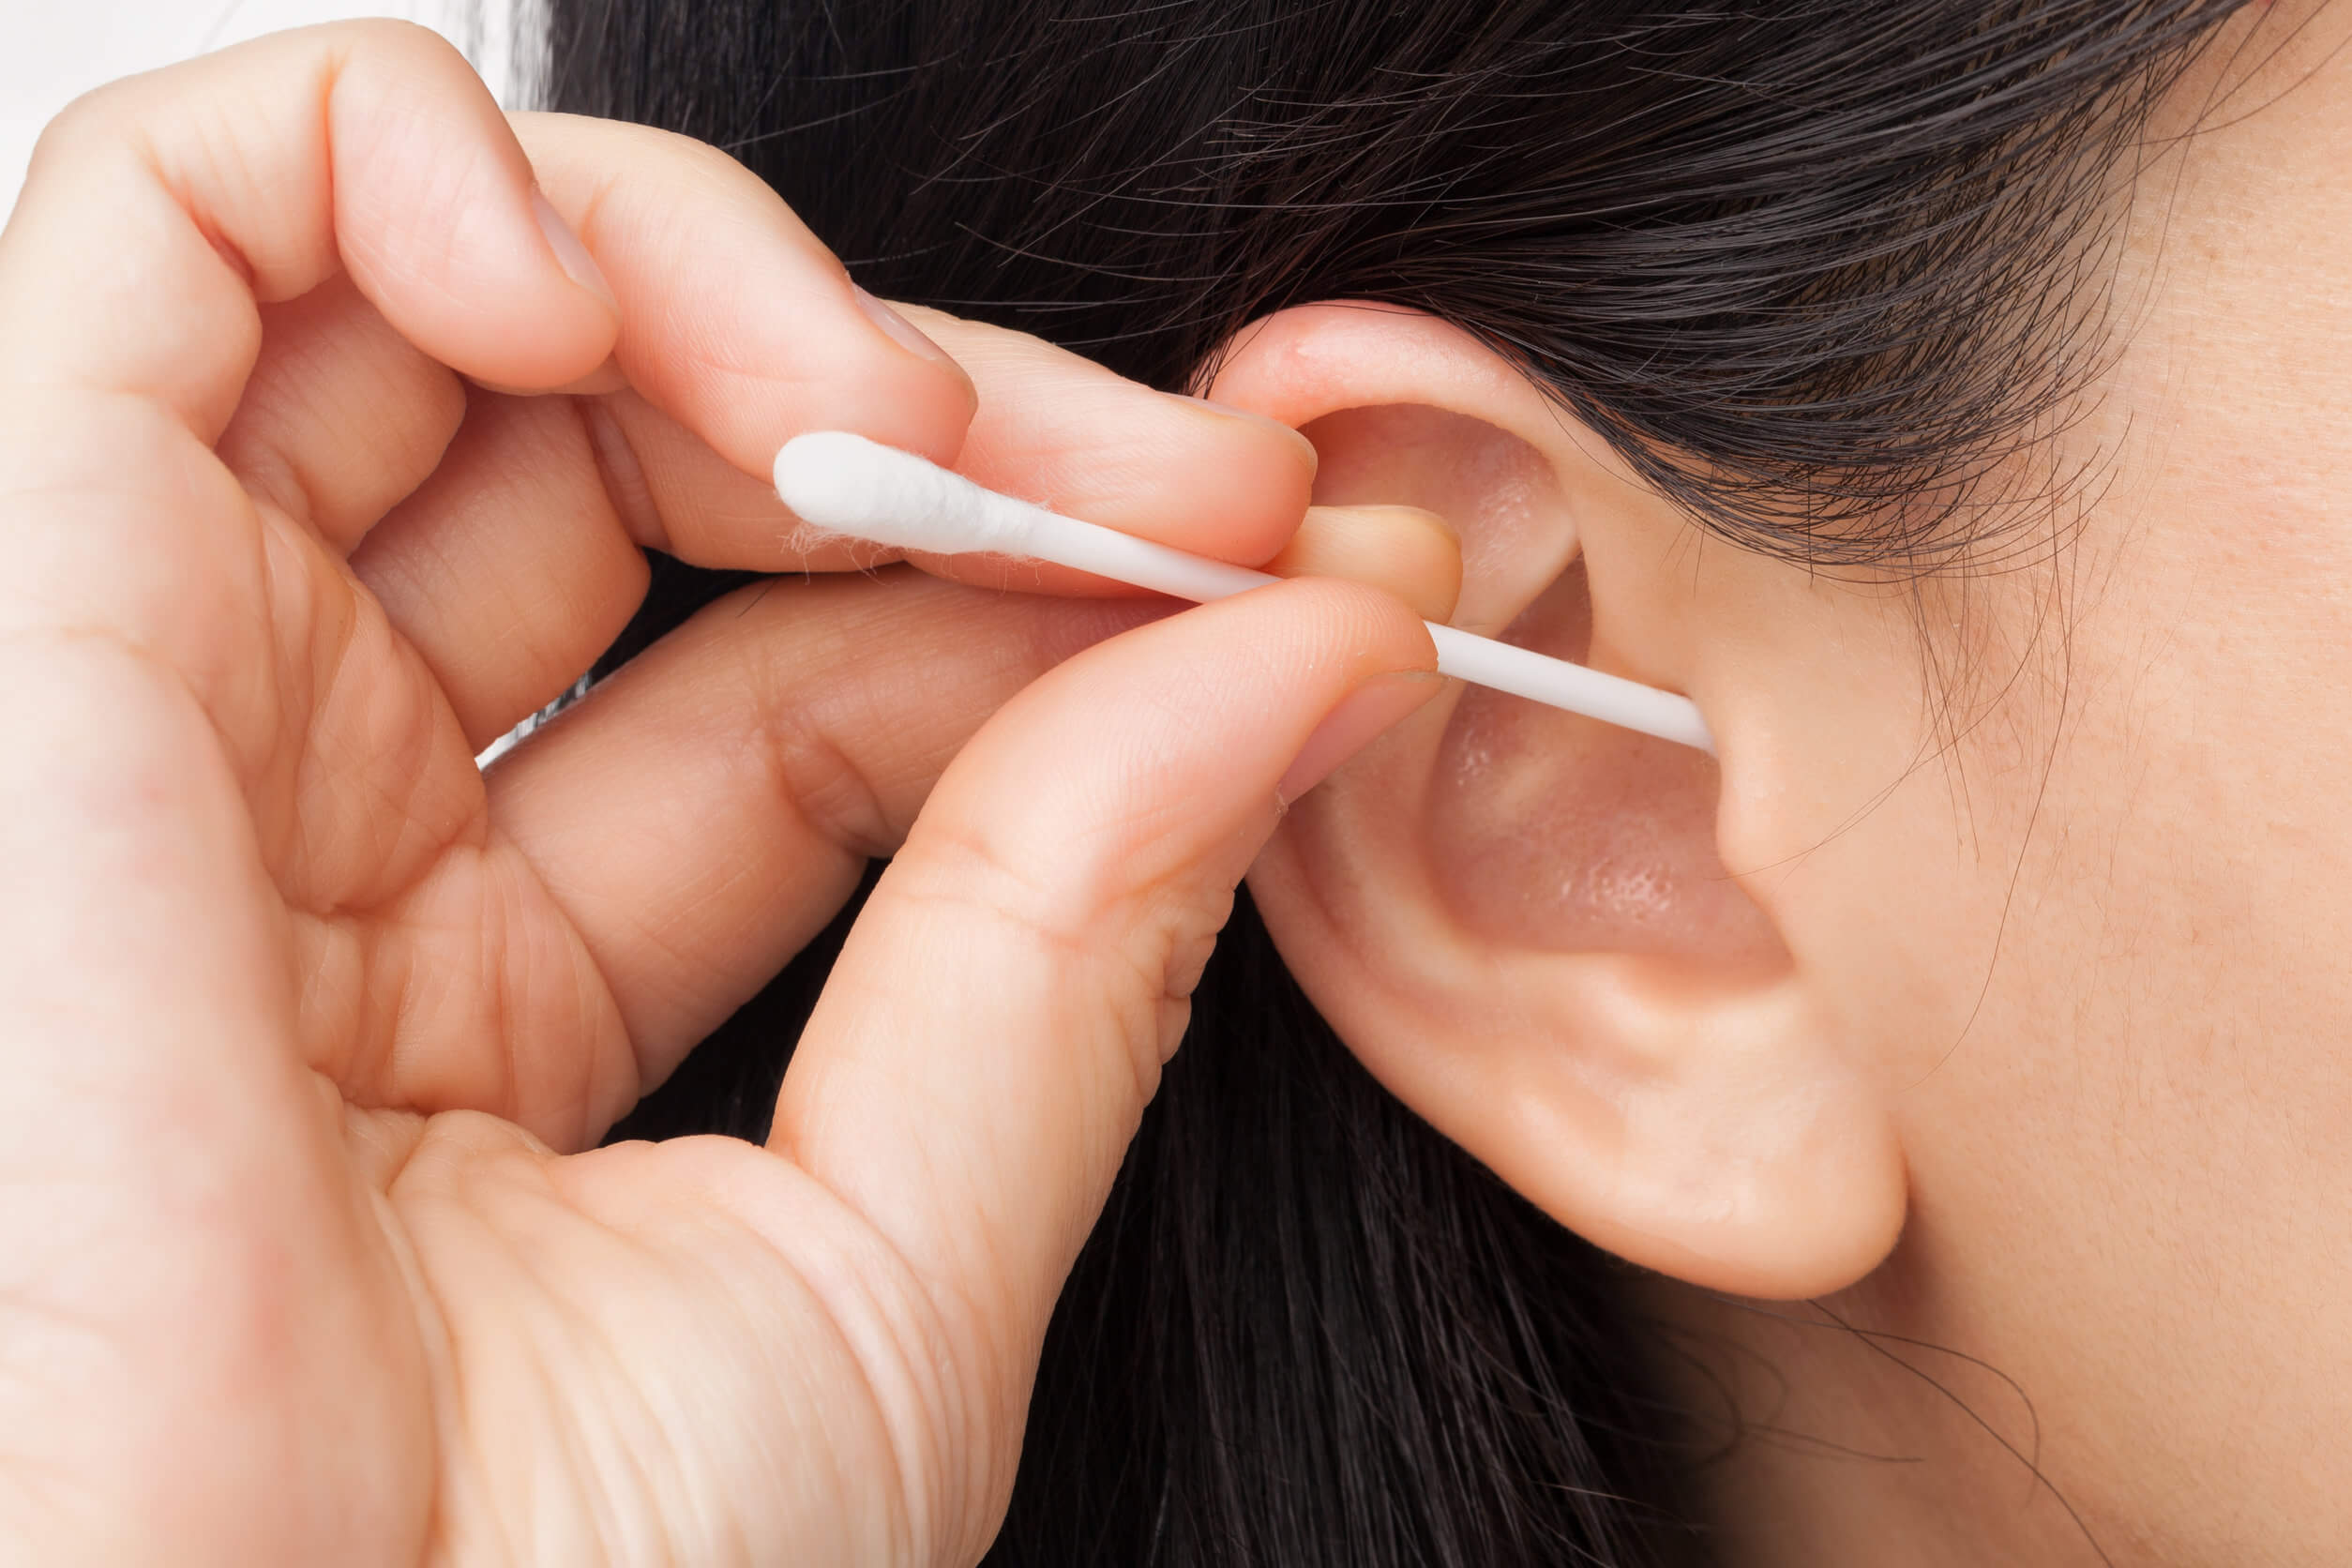 things you should not do to your ears: cotton swabs